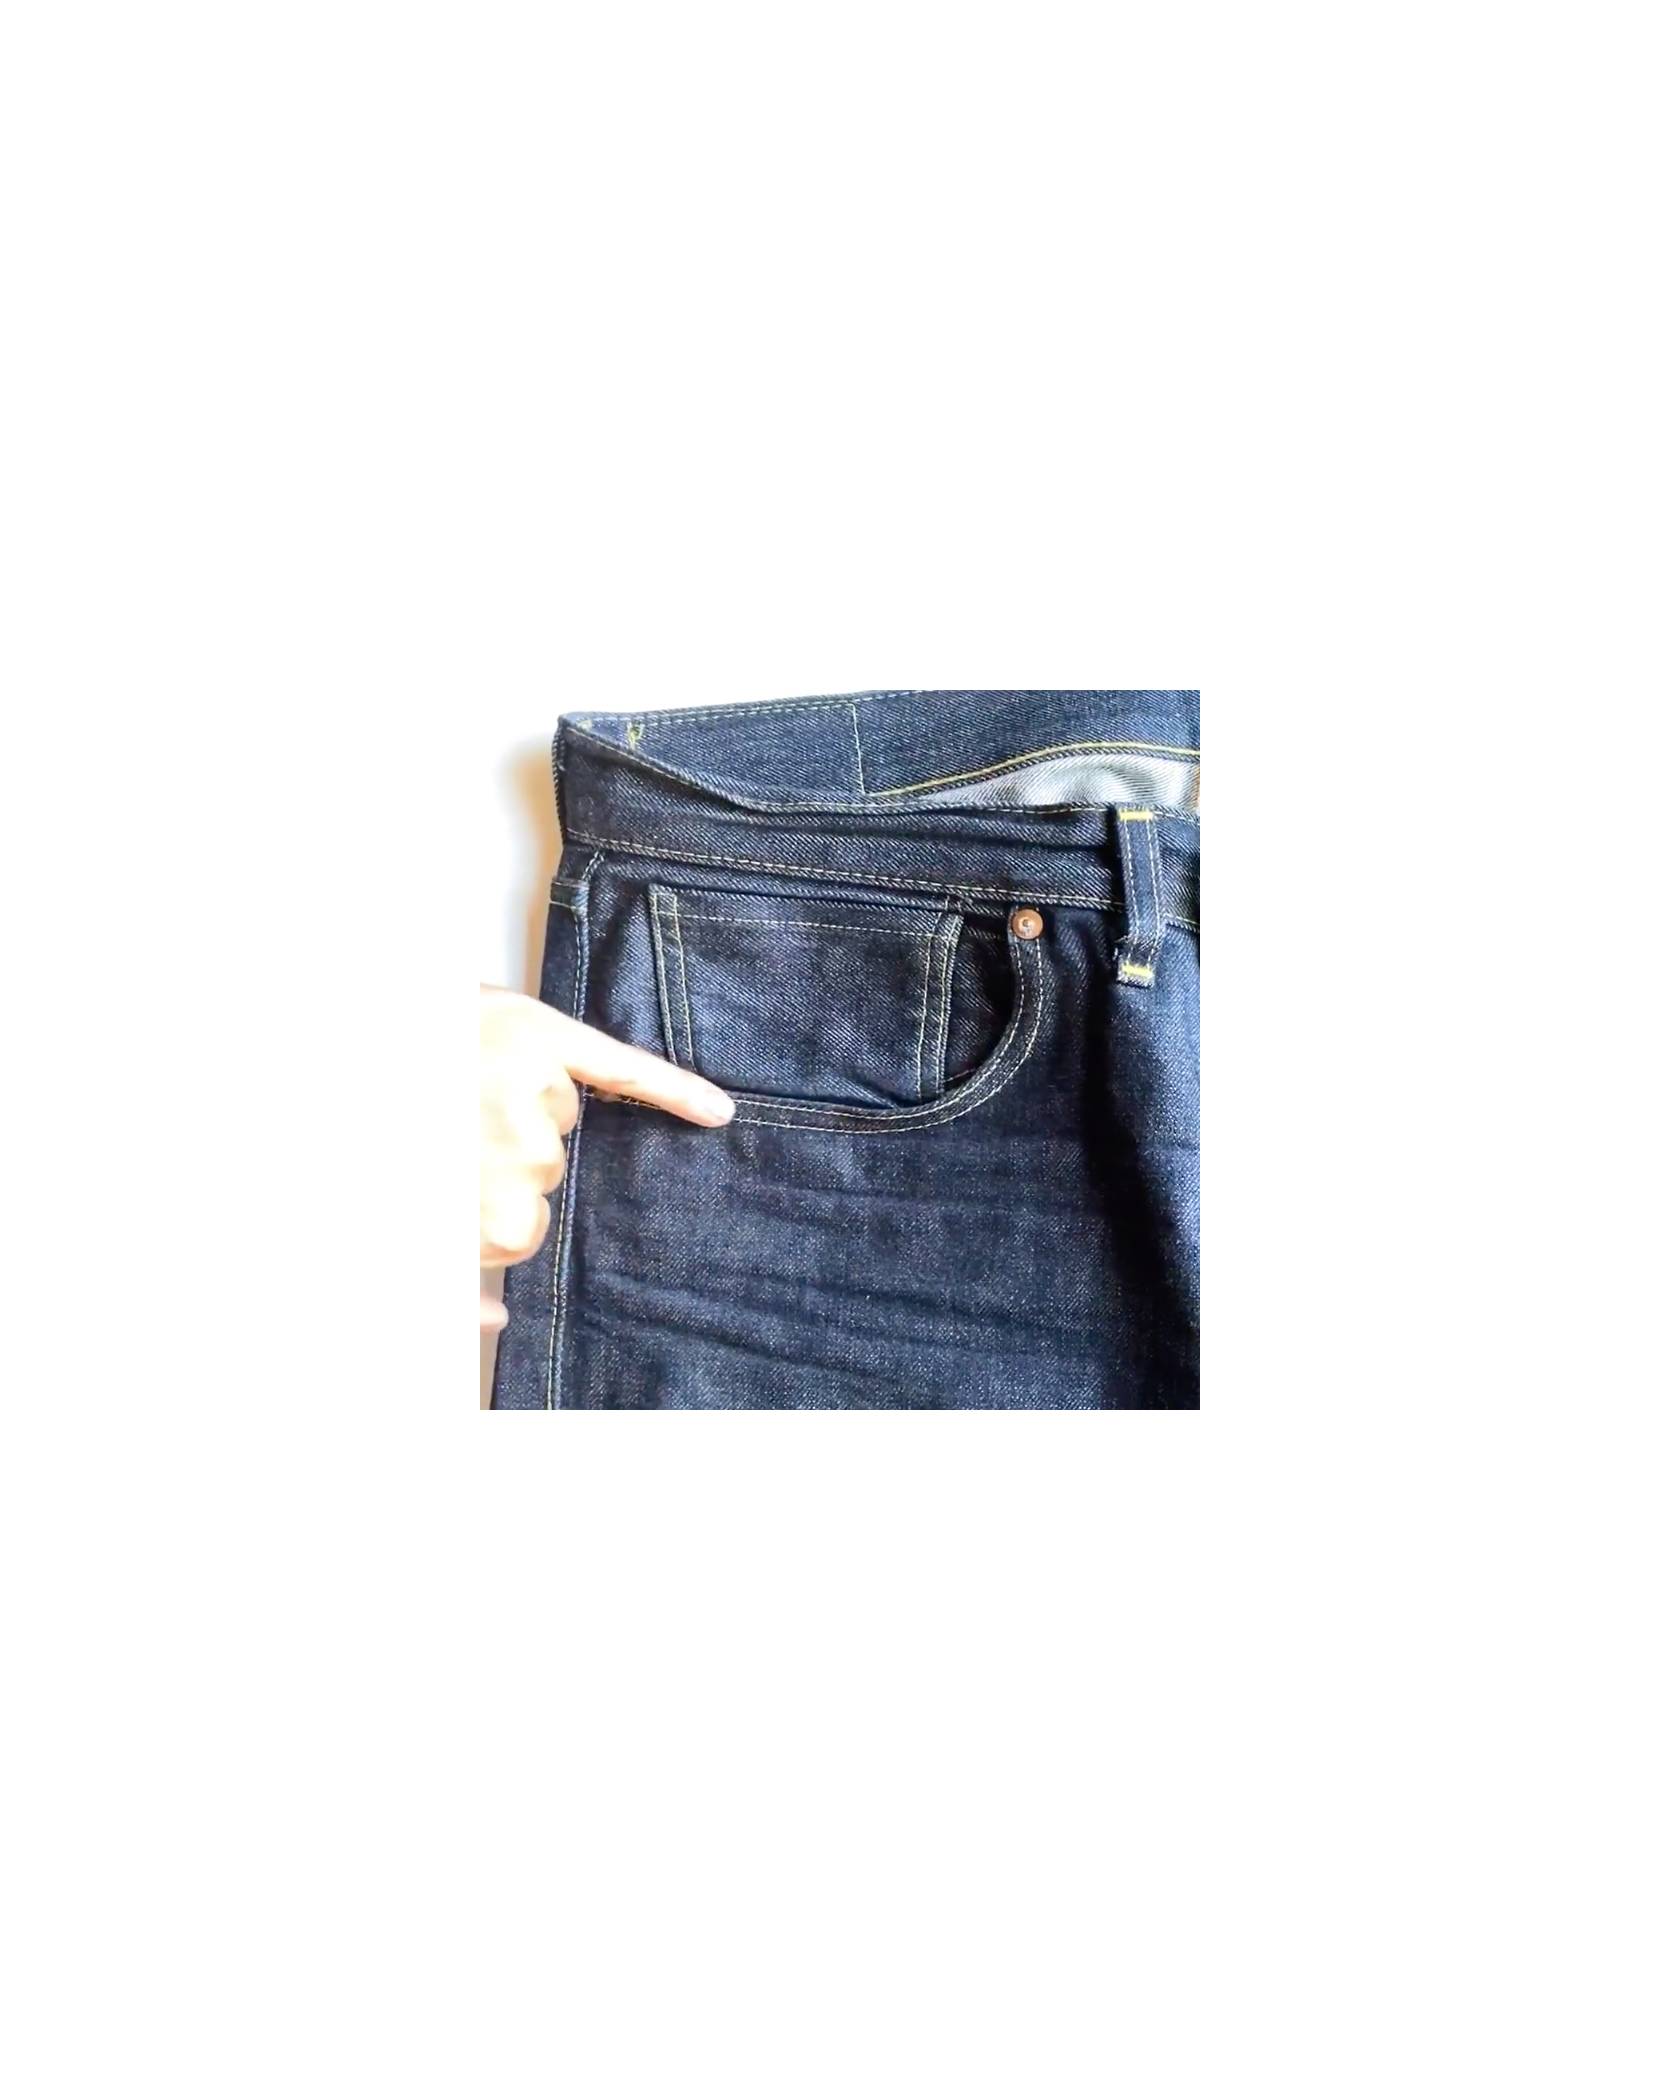 Premium Photo  Part of a blue denim jeans background pocket with damage  and seams with orange thread stitches